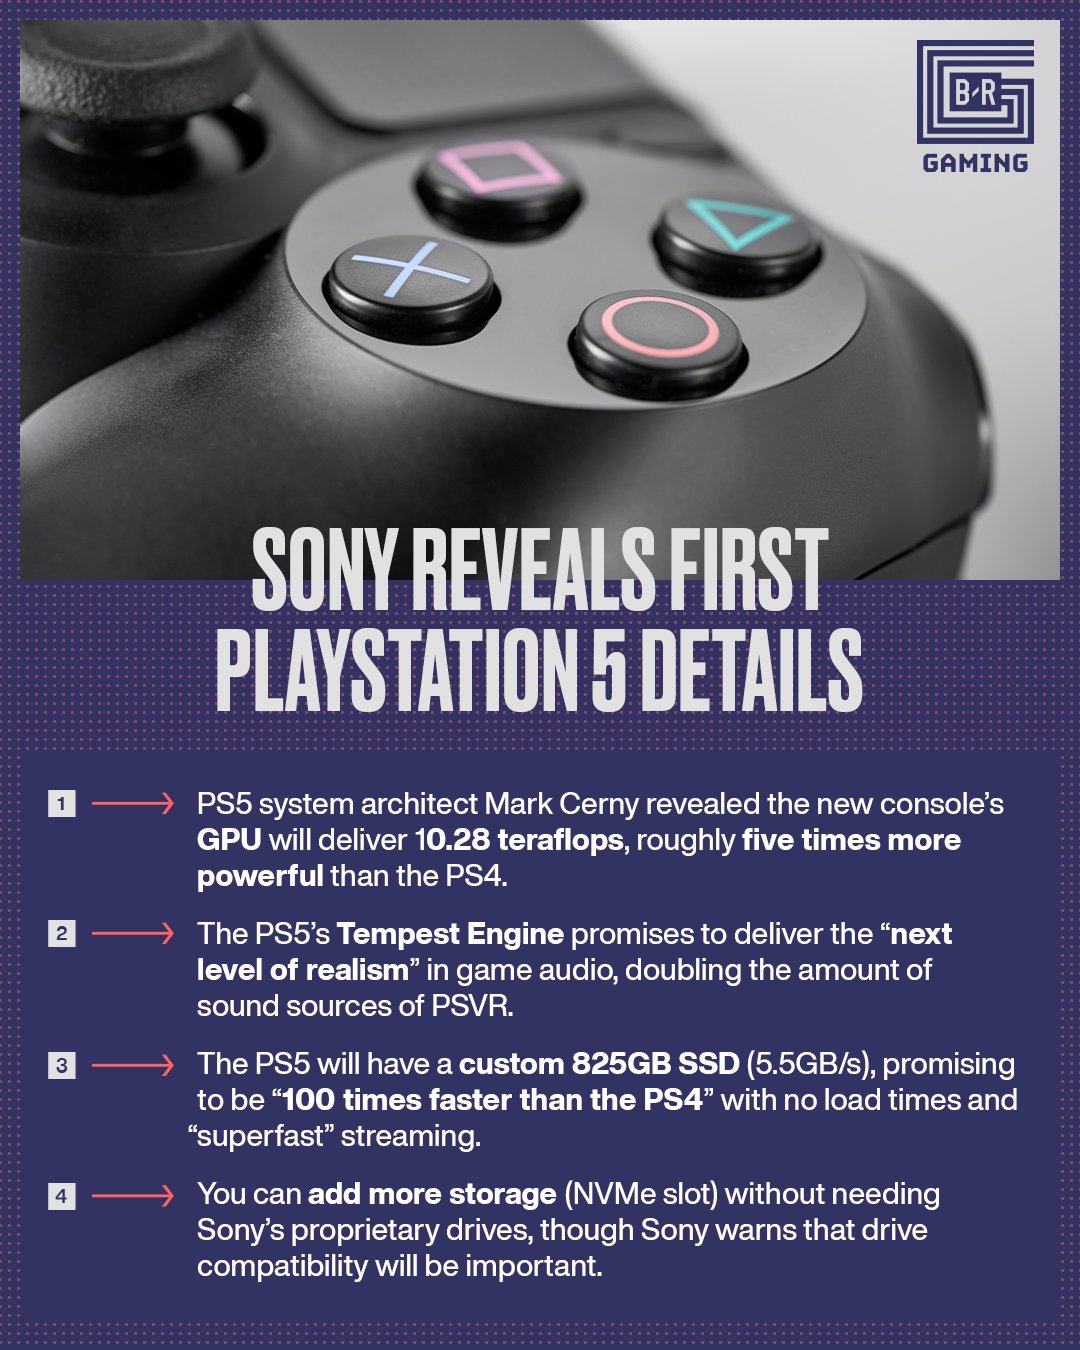 PS5 news at 9 am today(3/18)